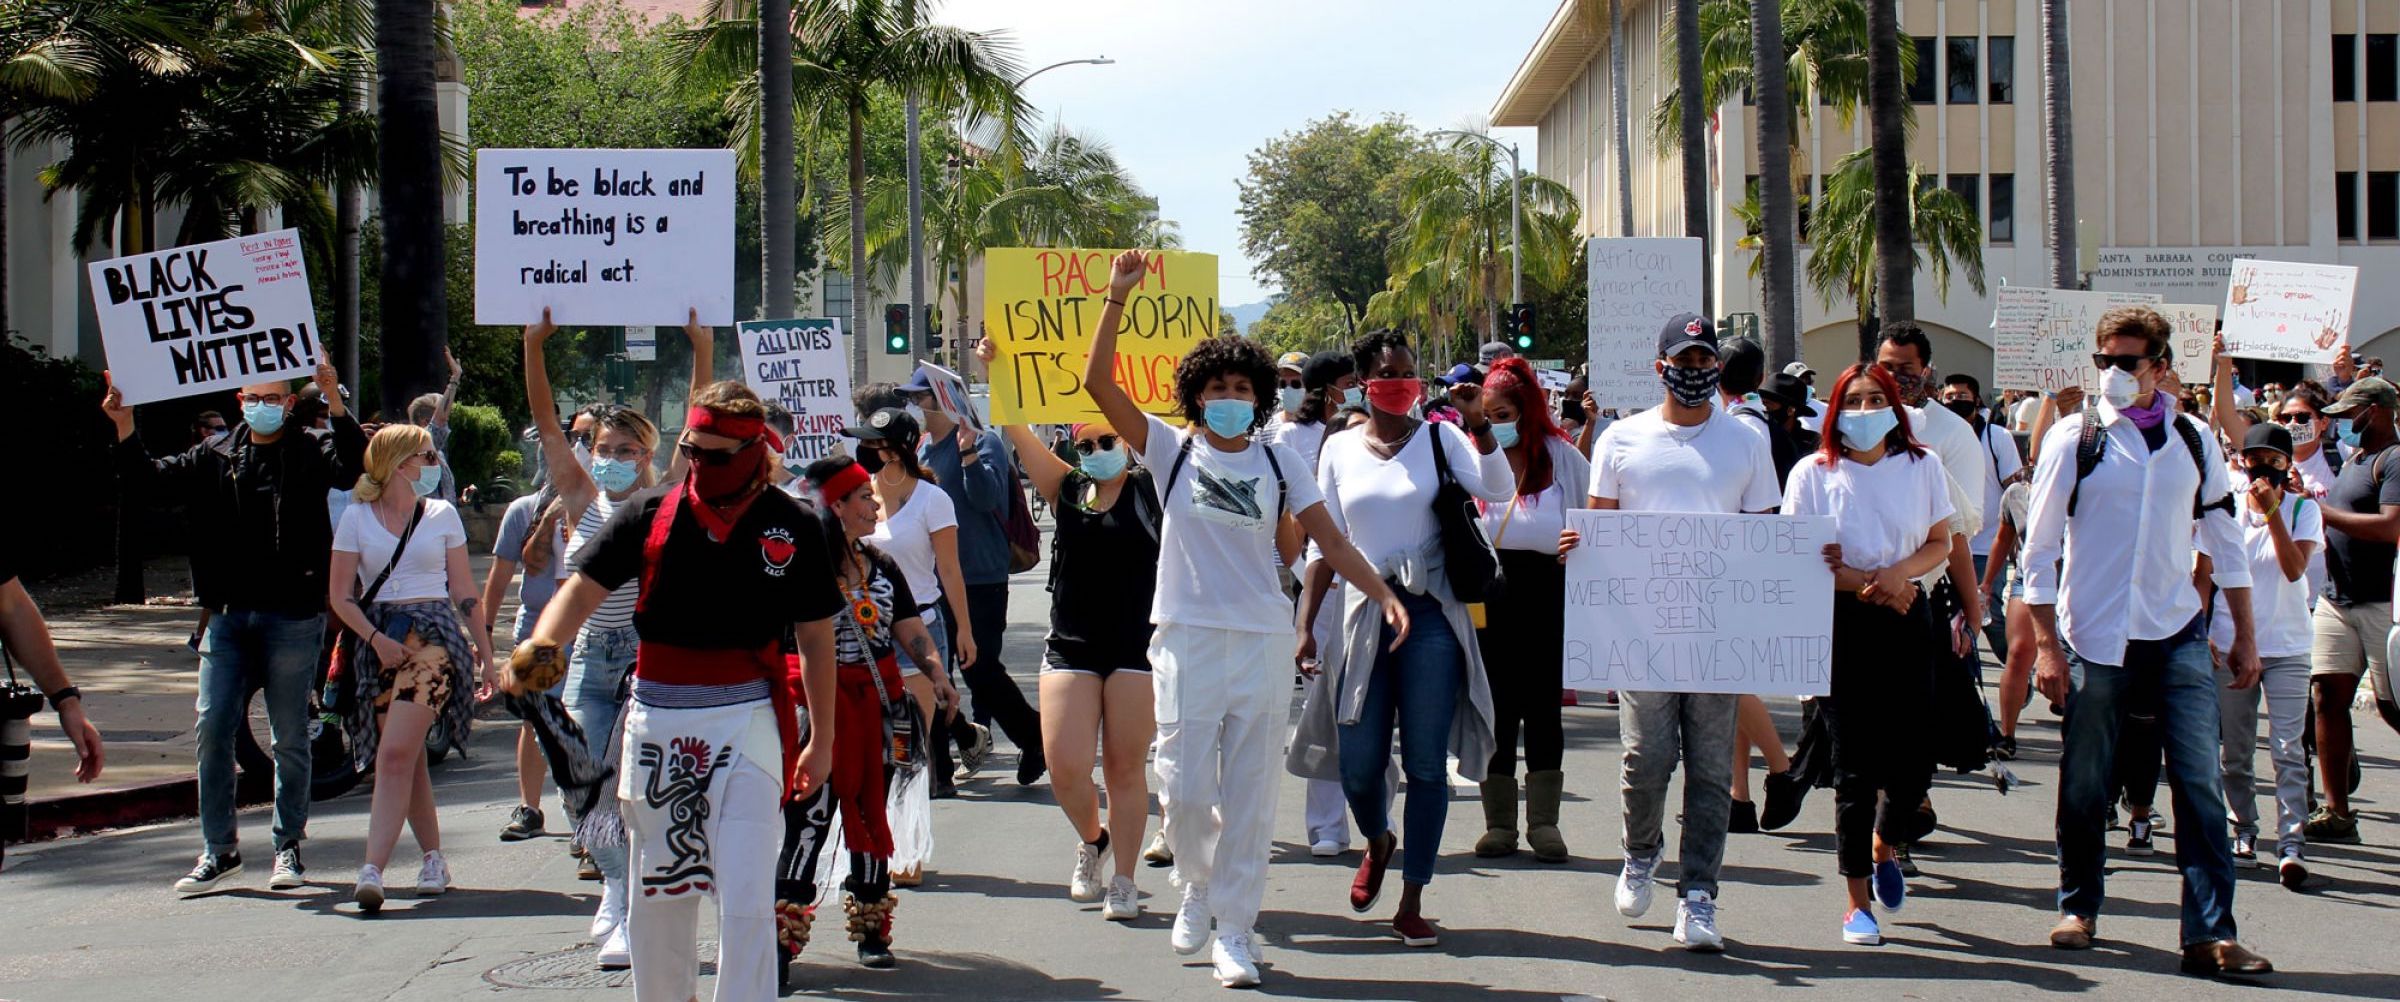 Photo of people at a protest in downtown Santa Barbara wearing facial coverings due to COVID-19